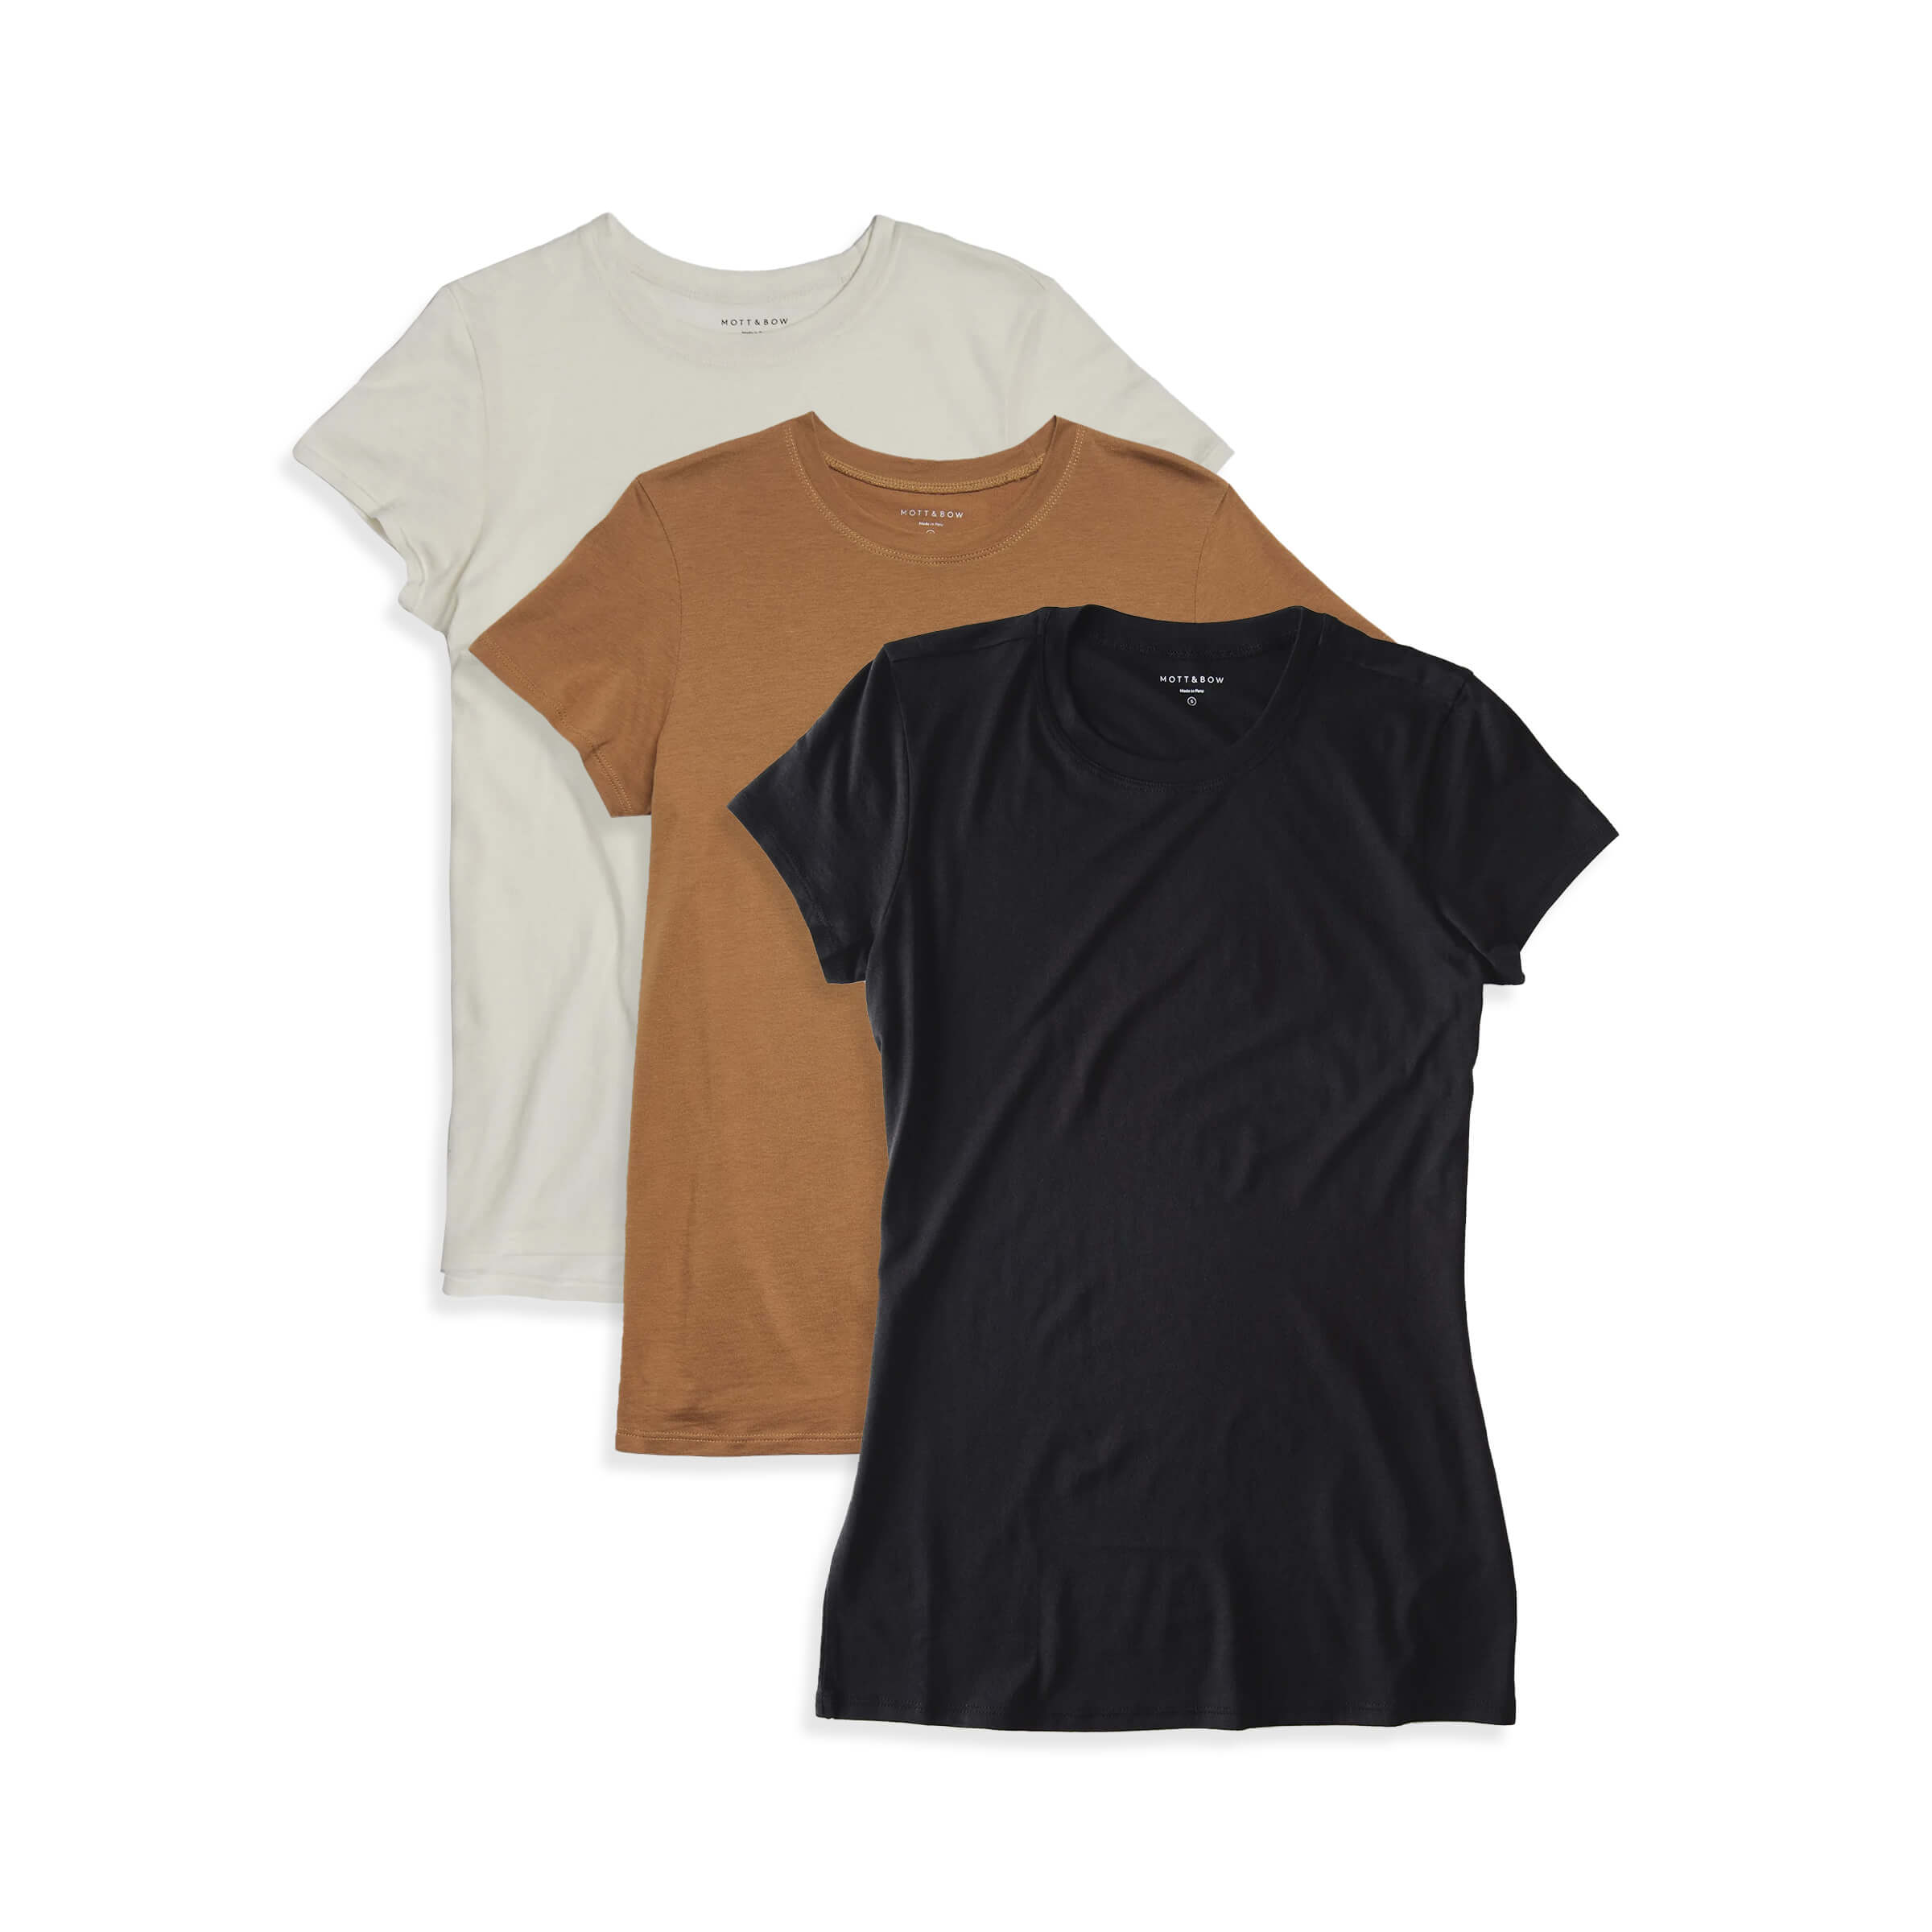 Women wearing Vintage Blanc/Cardamome/Noir Fitted Crew Marcy 3-Pack tees